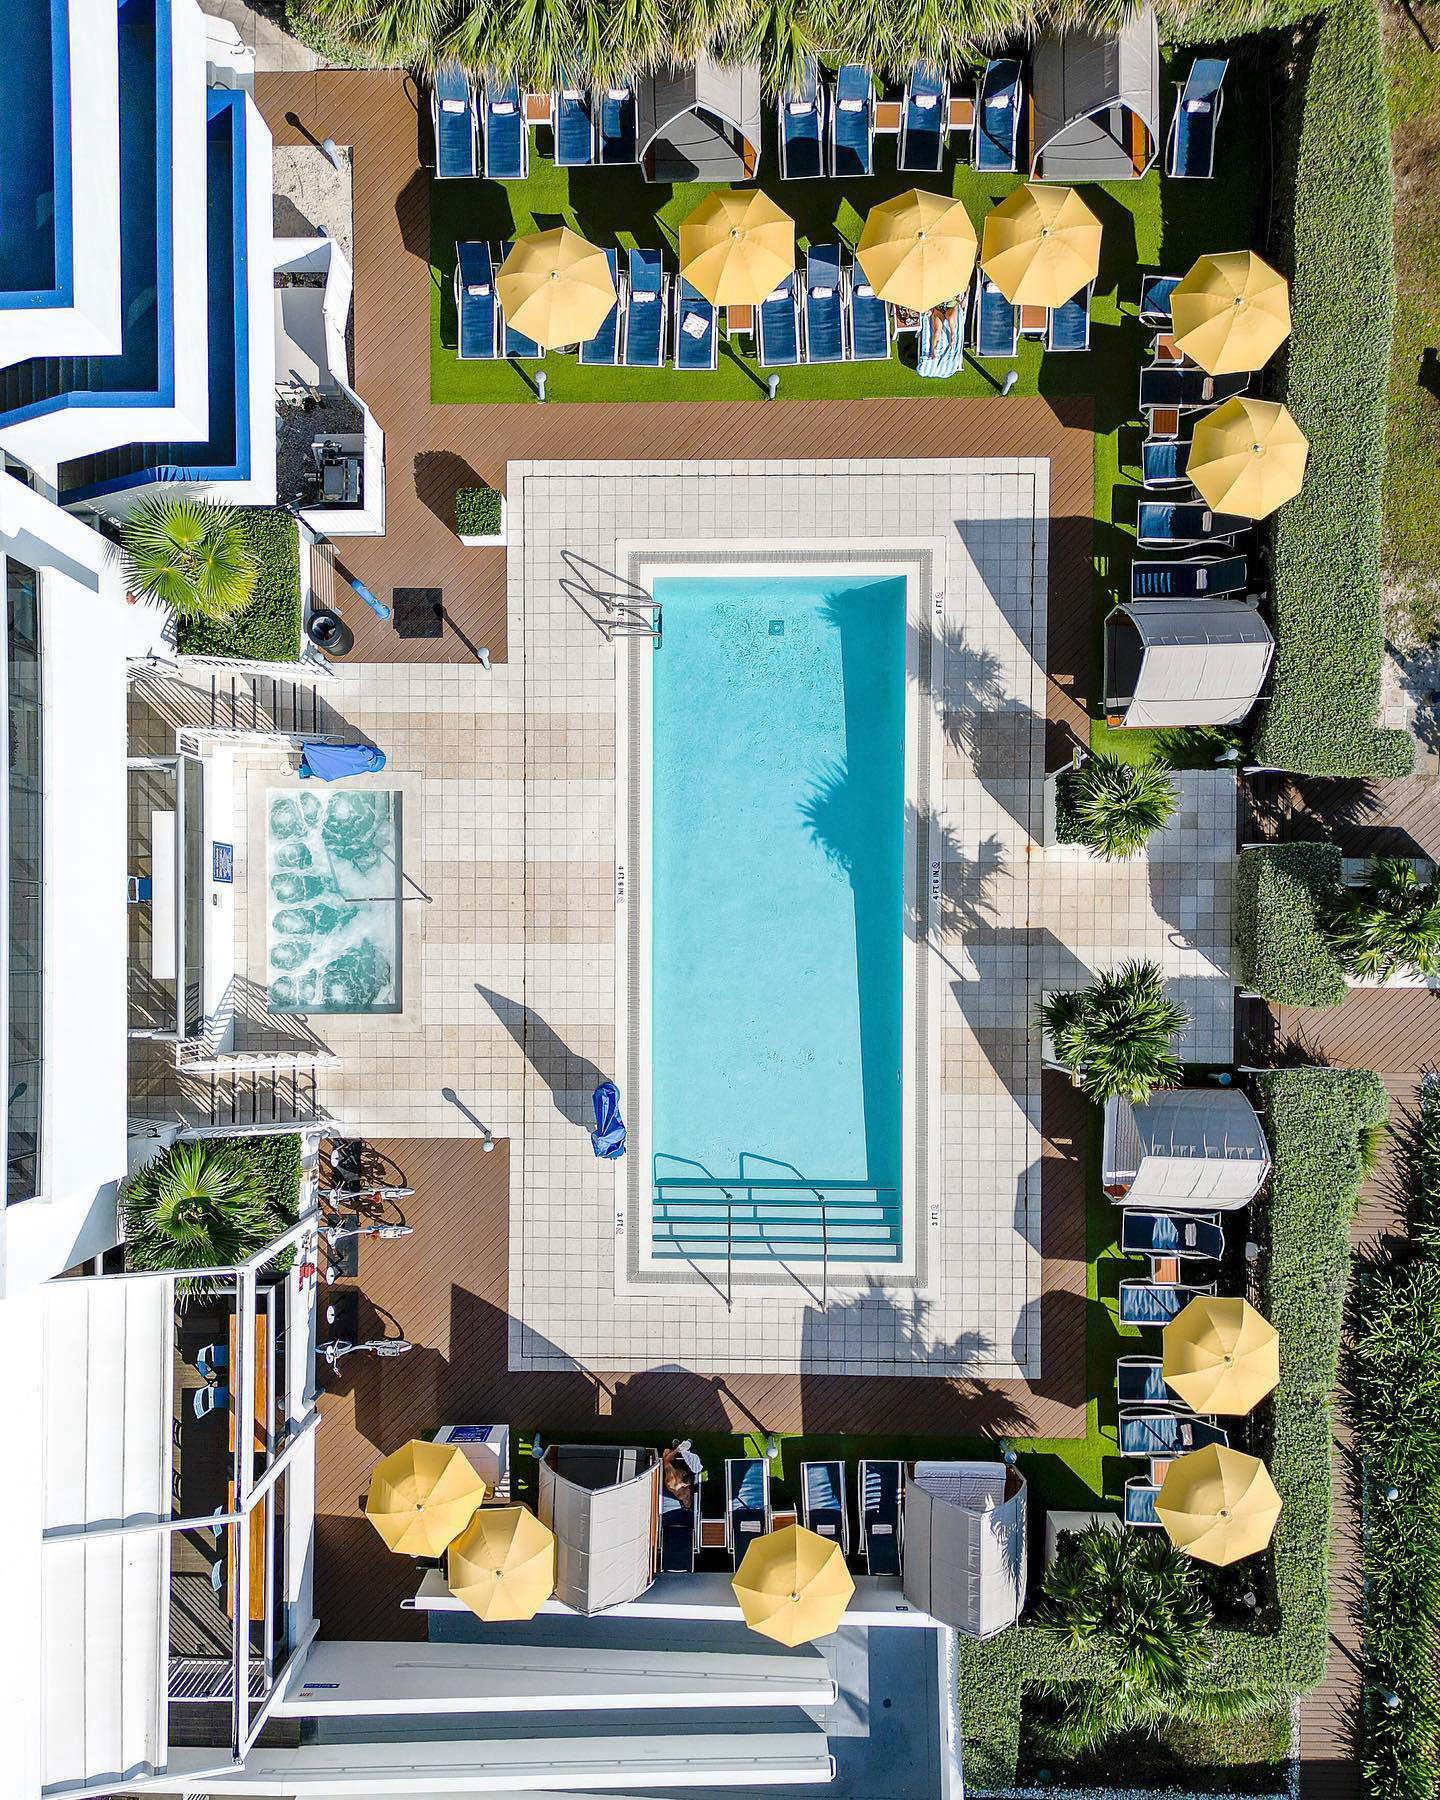 Hilton Cabana Miami Beach - We're making a splash with delightful poolside amenities daily at 12 pm